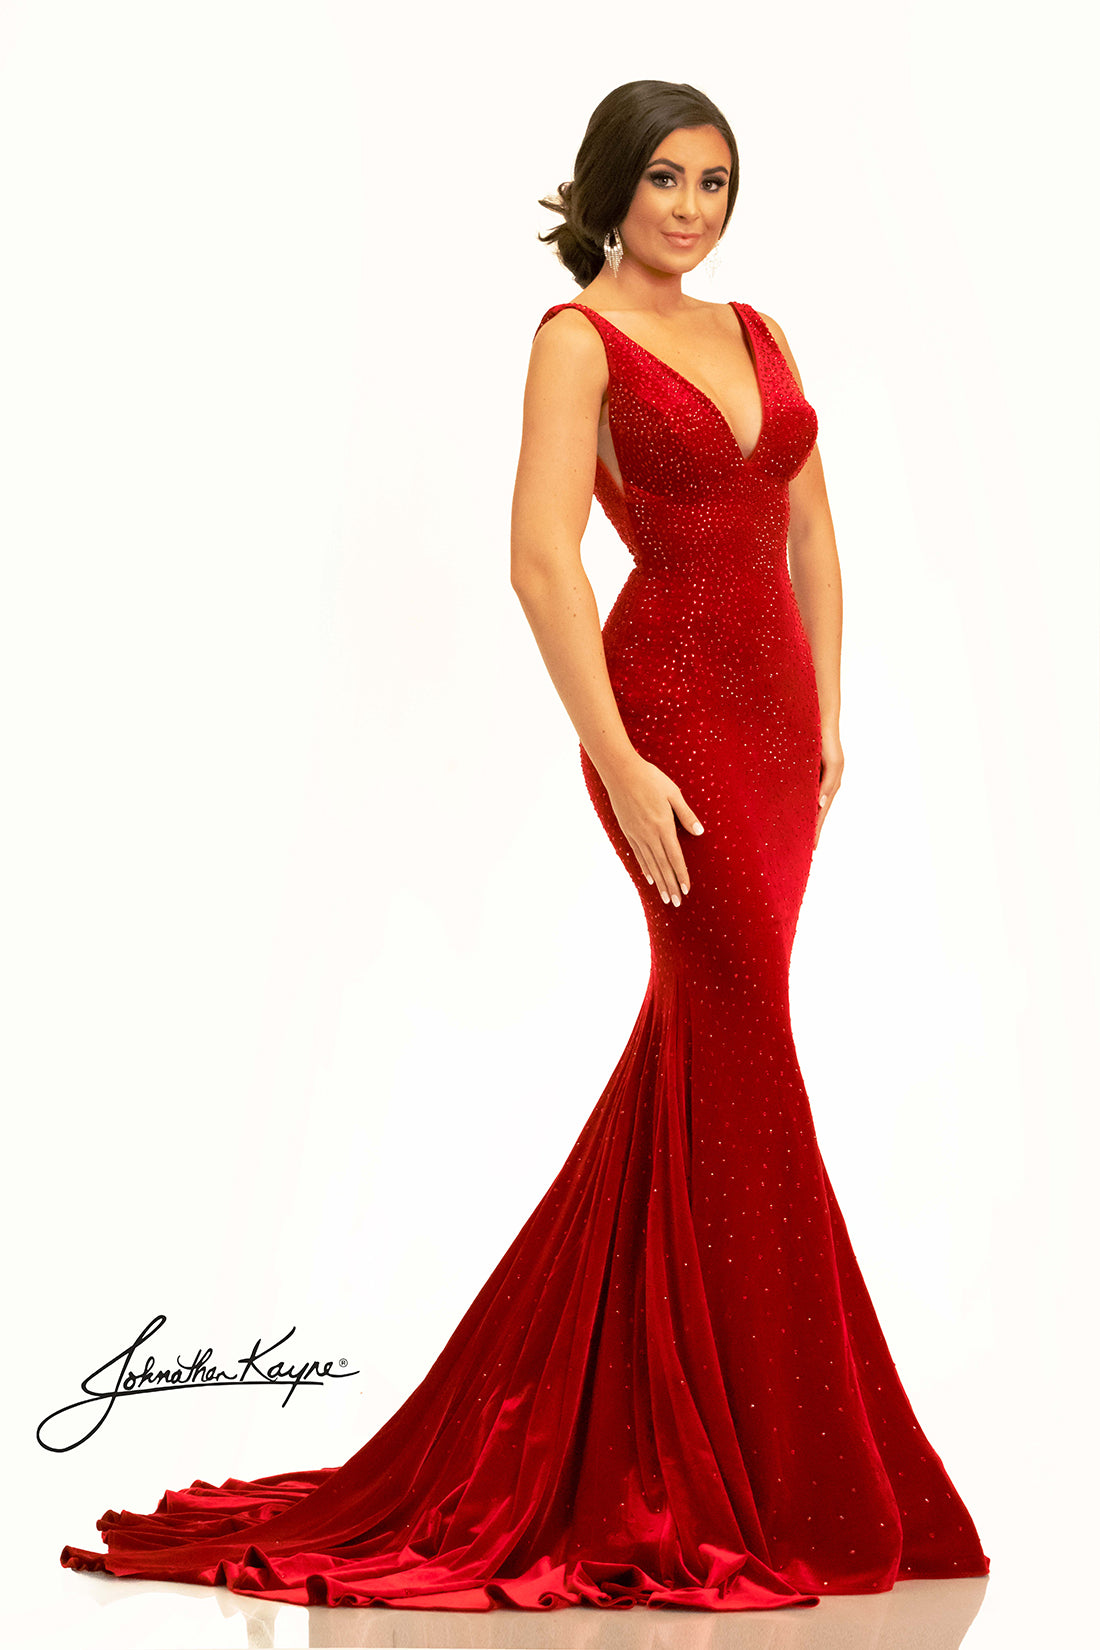 The Johnathan Kayne 2308 Long Velvet Crystal Pageant Dress is the perfect choice for a formal event. This stunning prom gown features a V-neck train and is embellished with exquisite crystals for a look that is sure to dazzle. With its high-quality velvet fabric, you'll have no trouble making a statement. This head to toe crystal shimmering stretch velvet dress is sure to be a winner. 